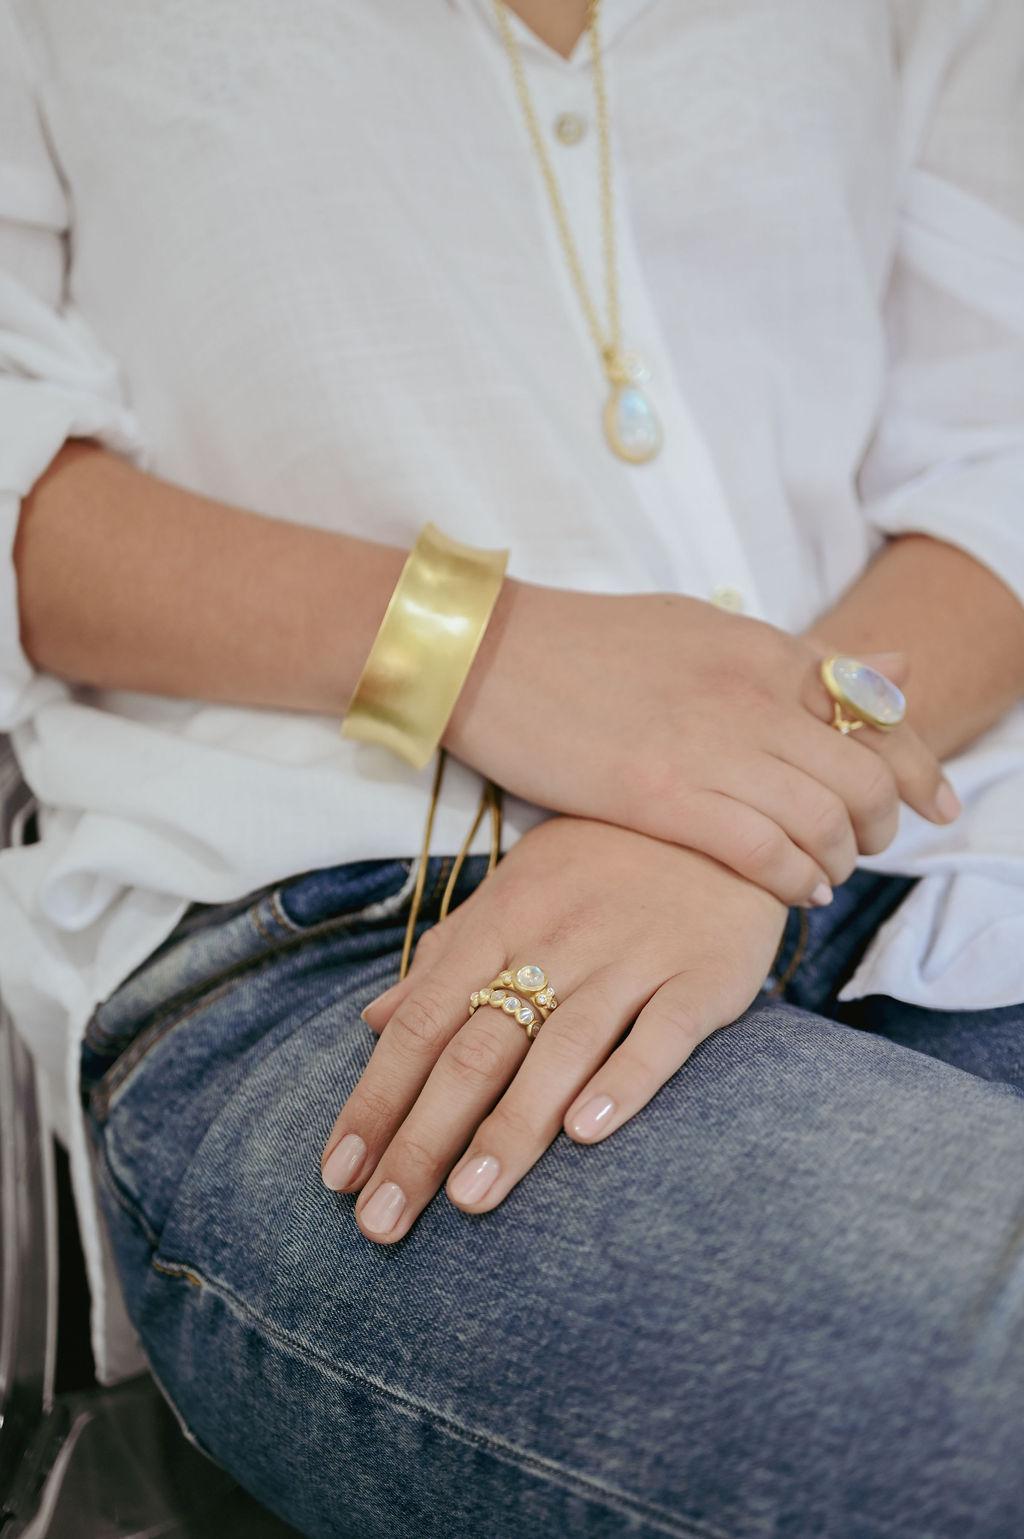 Faye Kim's Anticlastic Cuff boasts a modern design that is sure to make a statement and become a cherished treasure. Handcrafted using a technique that transforms a sheet of gold into an organic form with structural strength. Wrap your arm in this